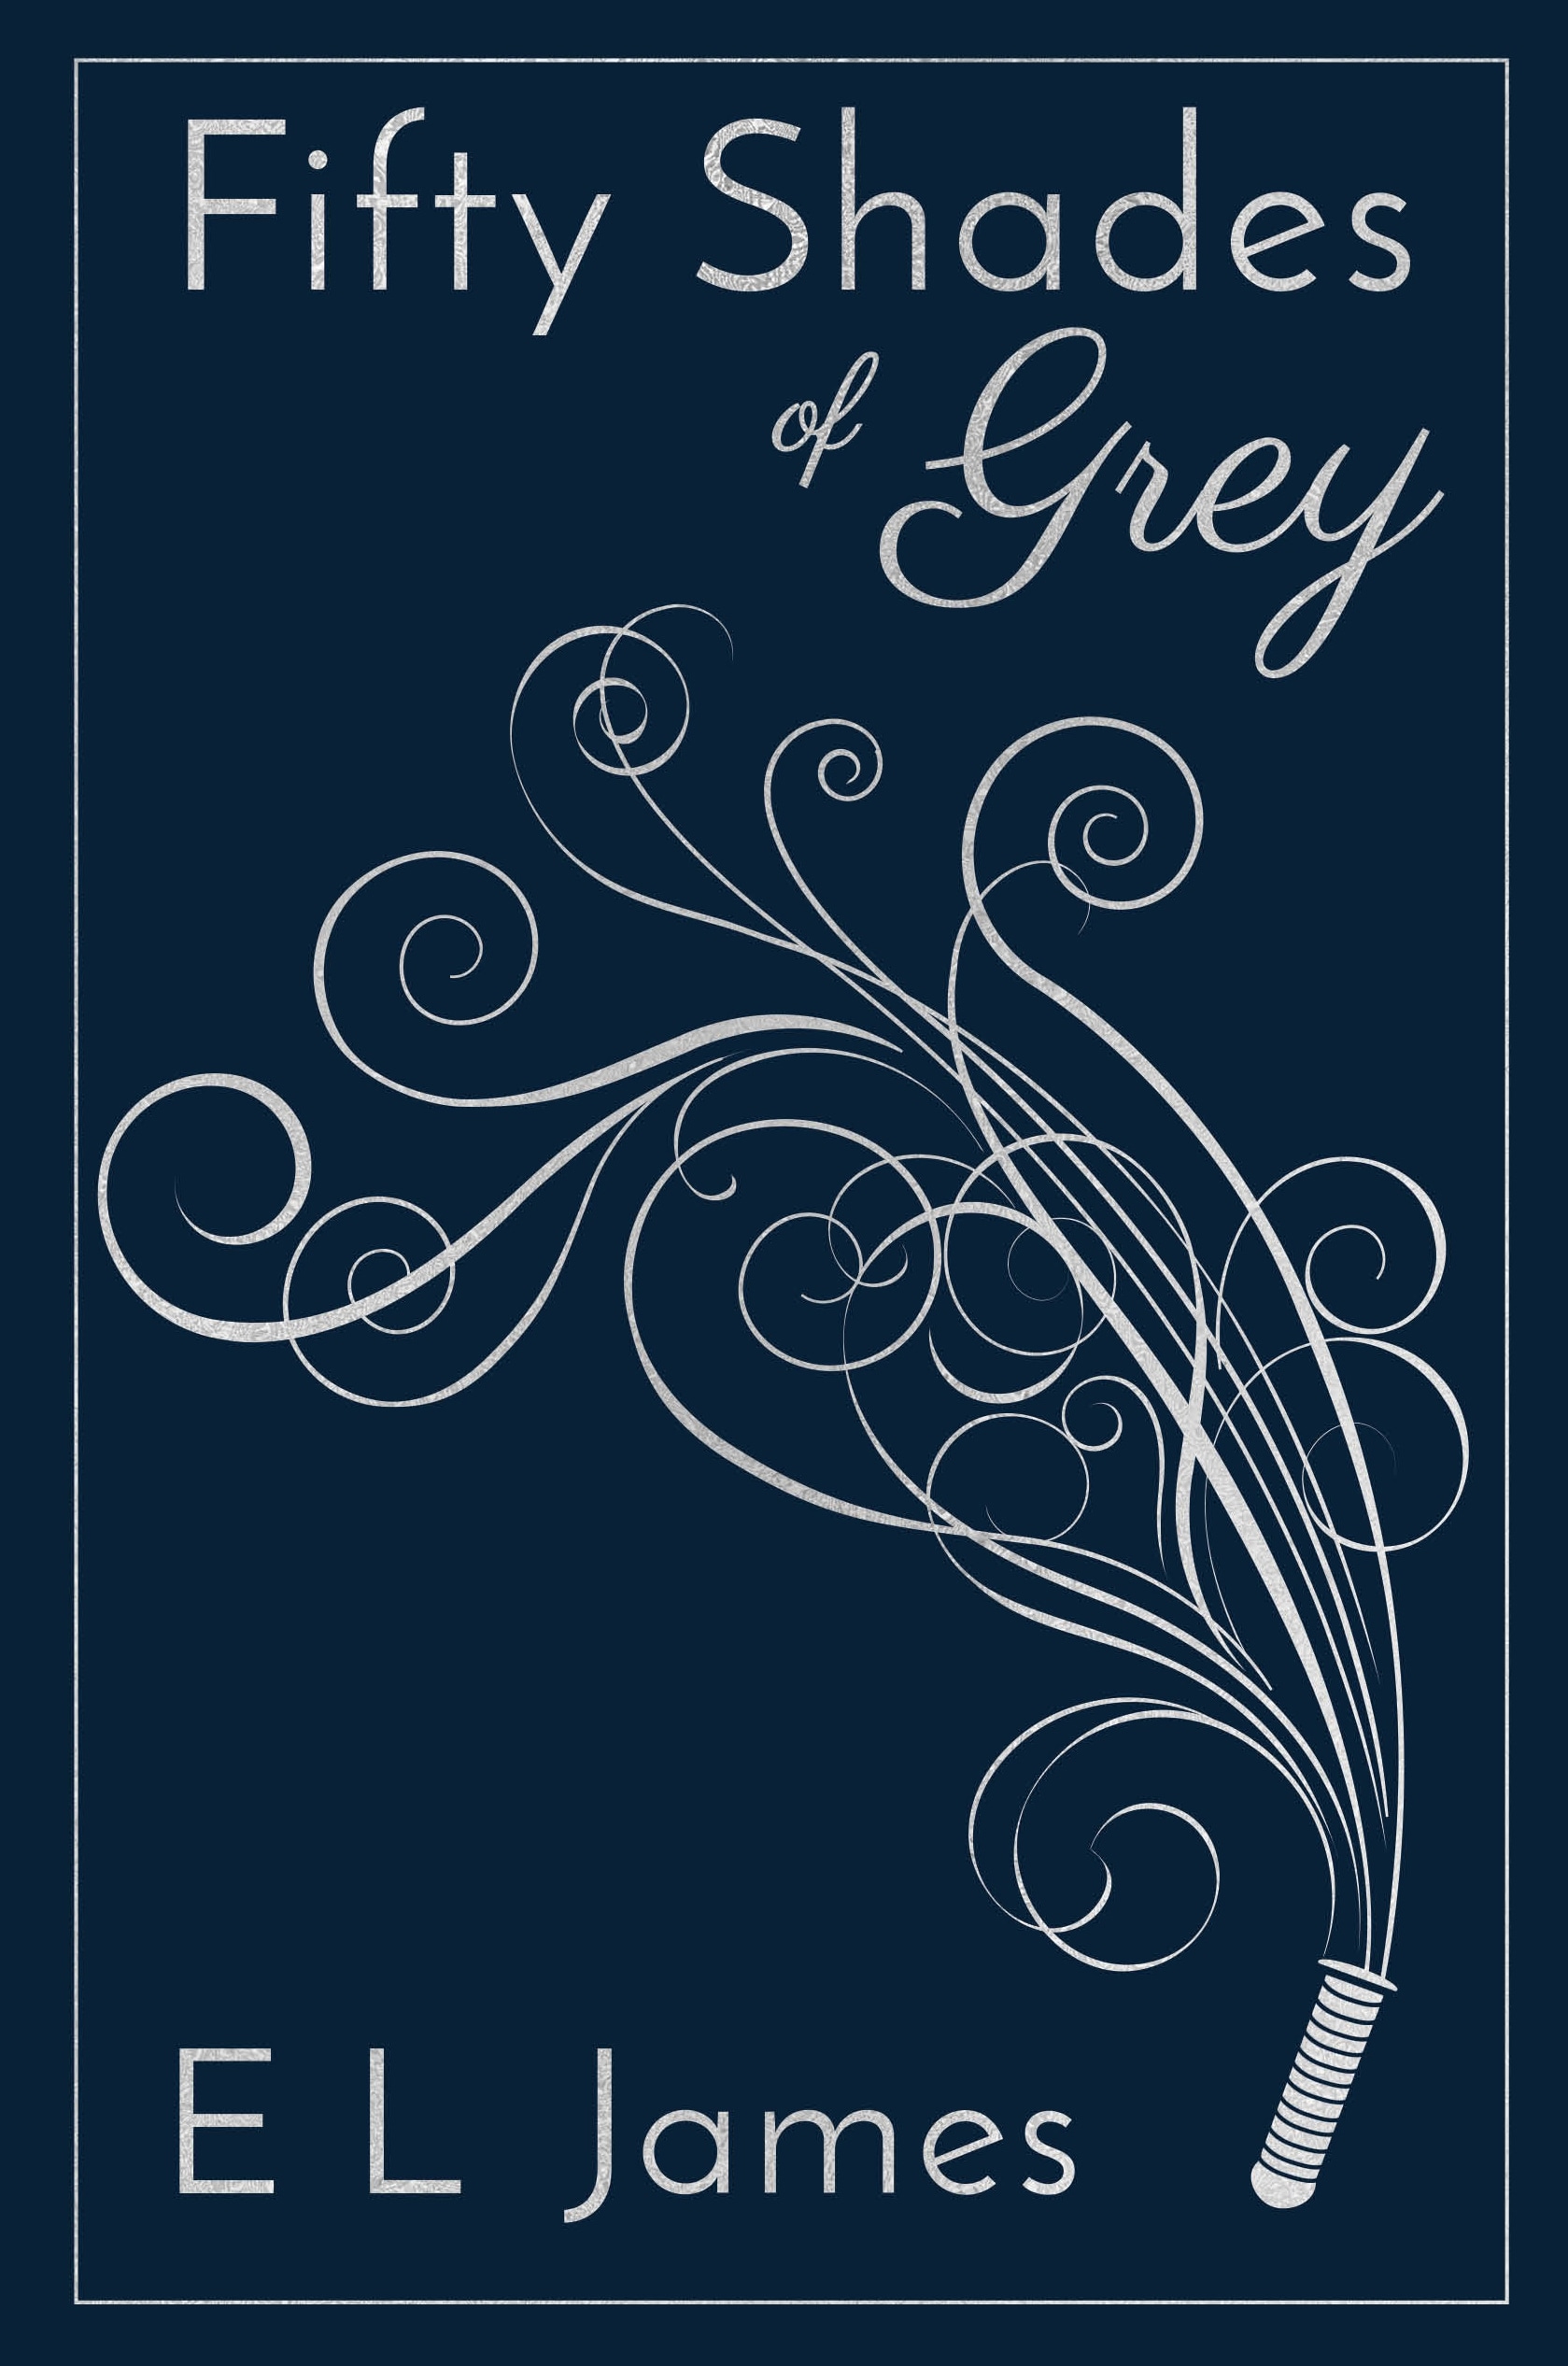 Book “Fifty Shades of Grey” by E L James — April 5, 2022